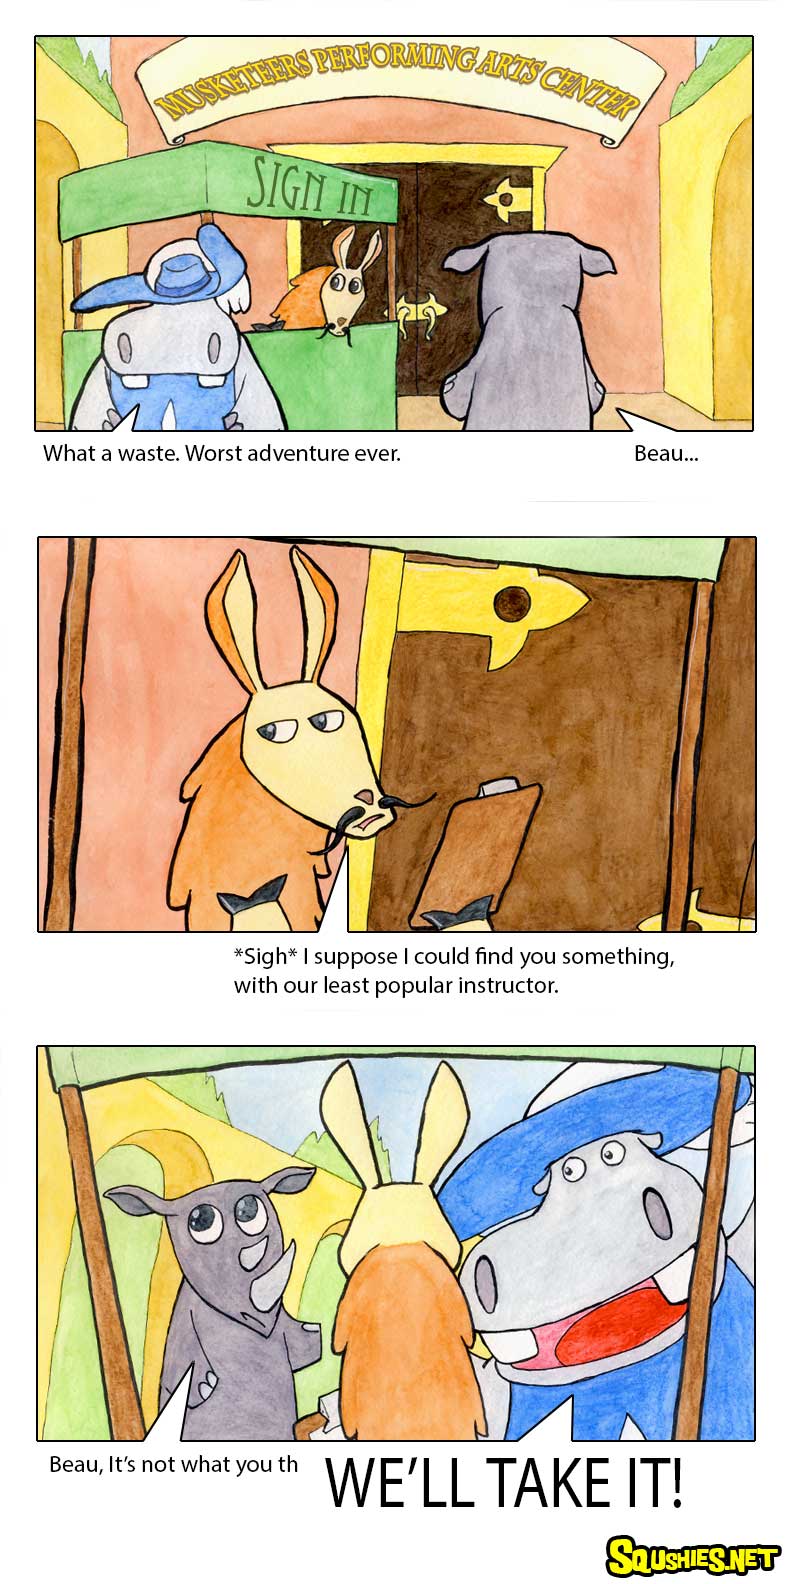 The Squshies web comic! Read about the adventures of Beauregard the Hippo and Reginald the Rhino - Three Musketeers - Week 4